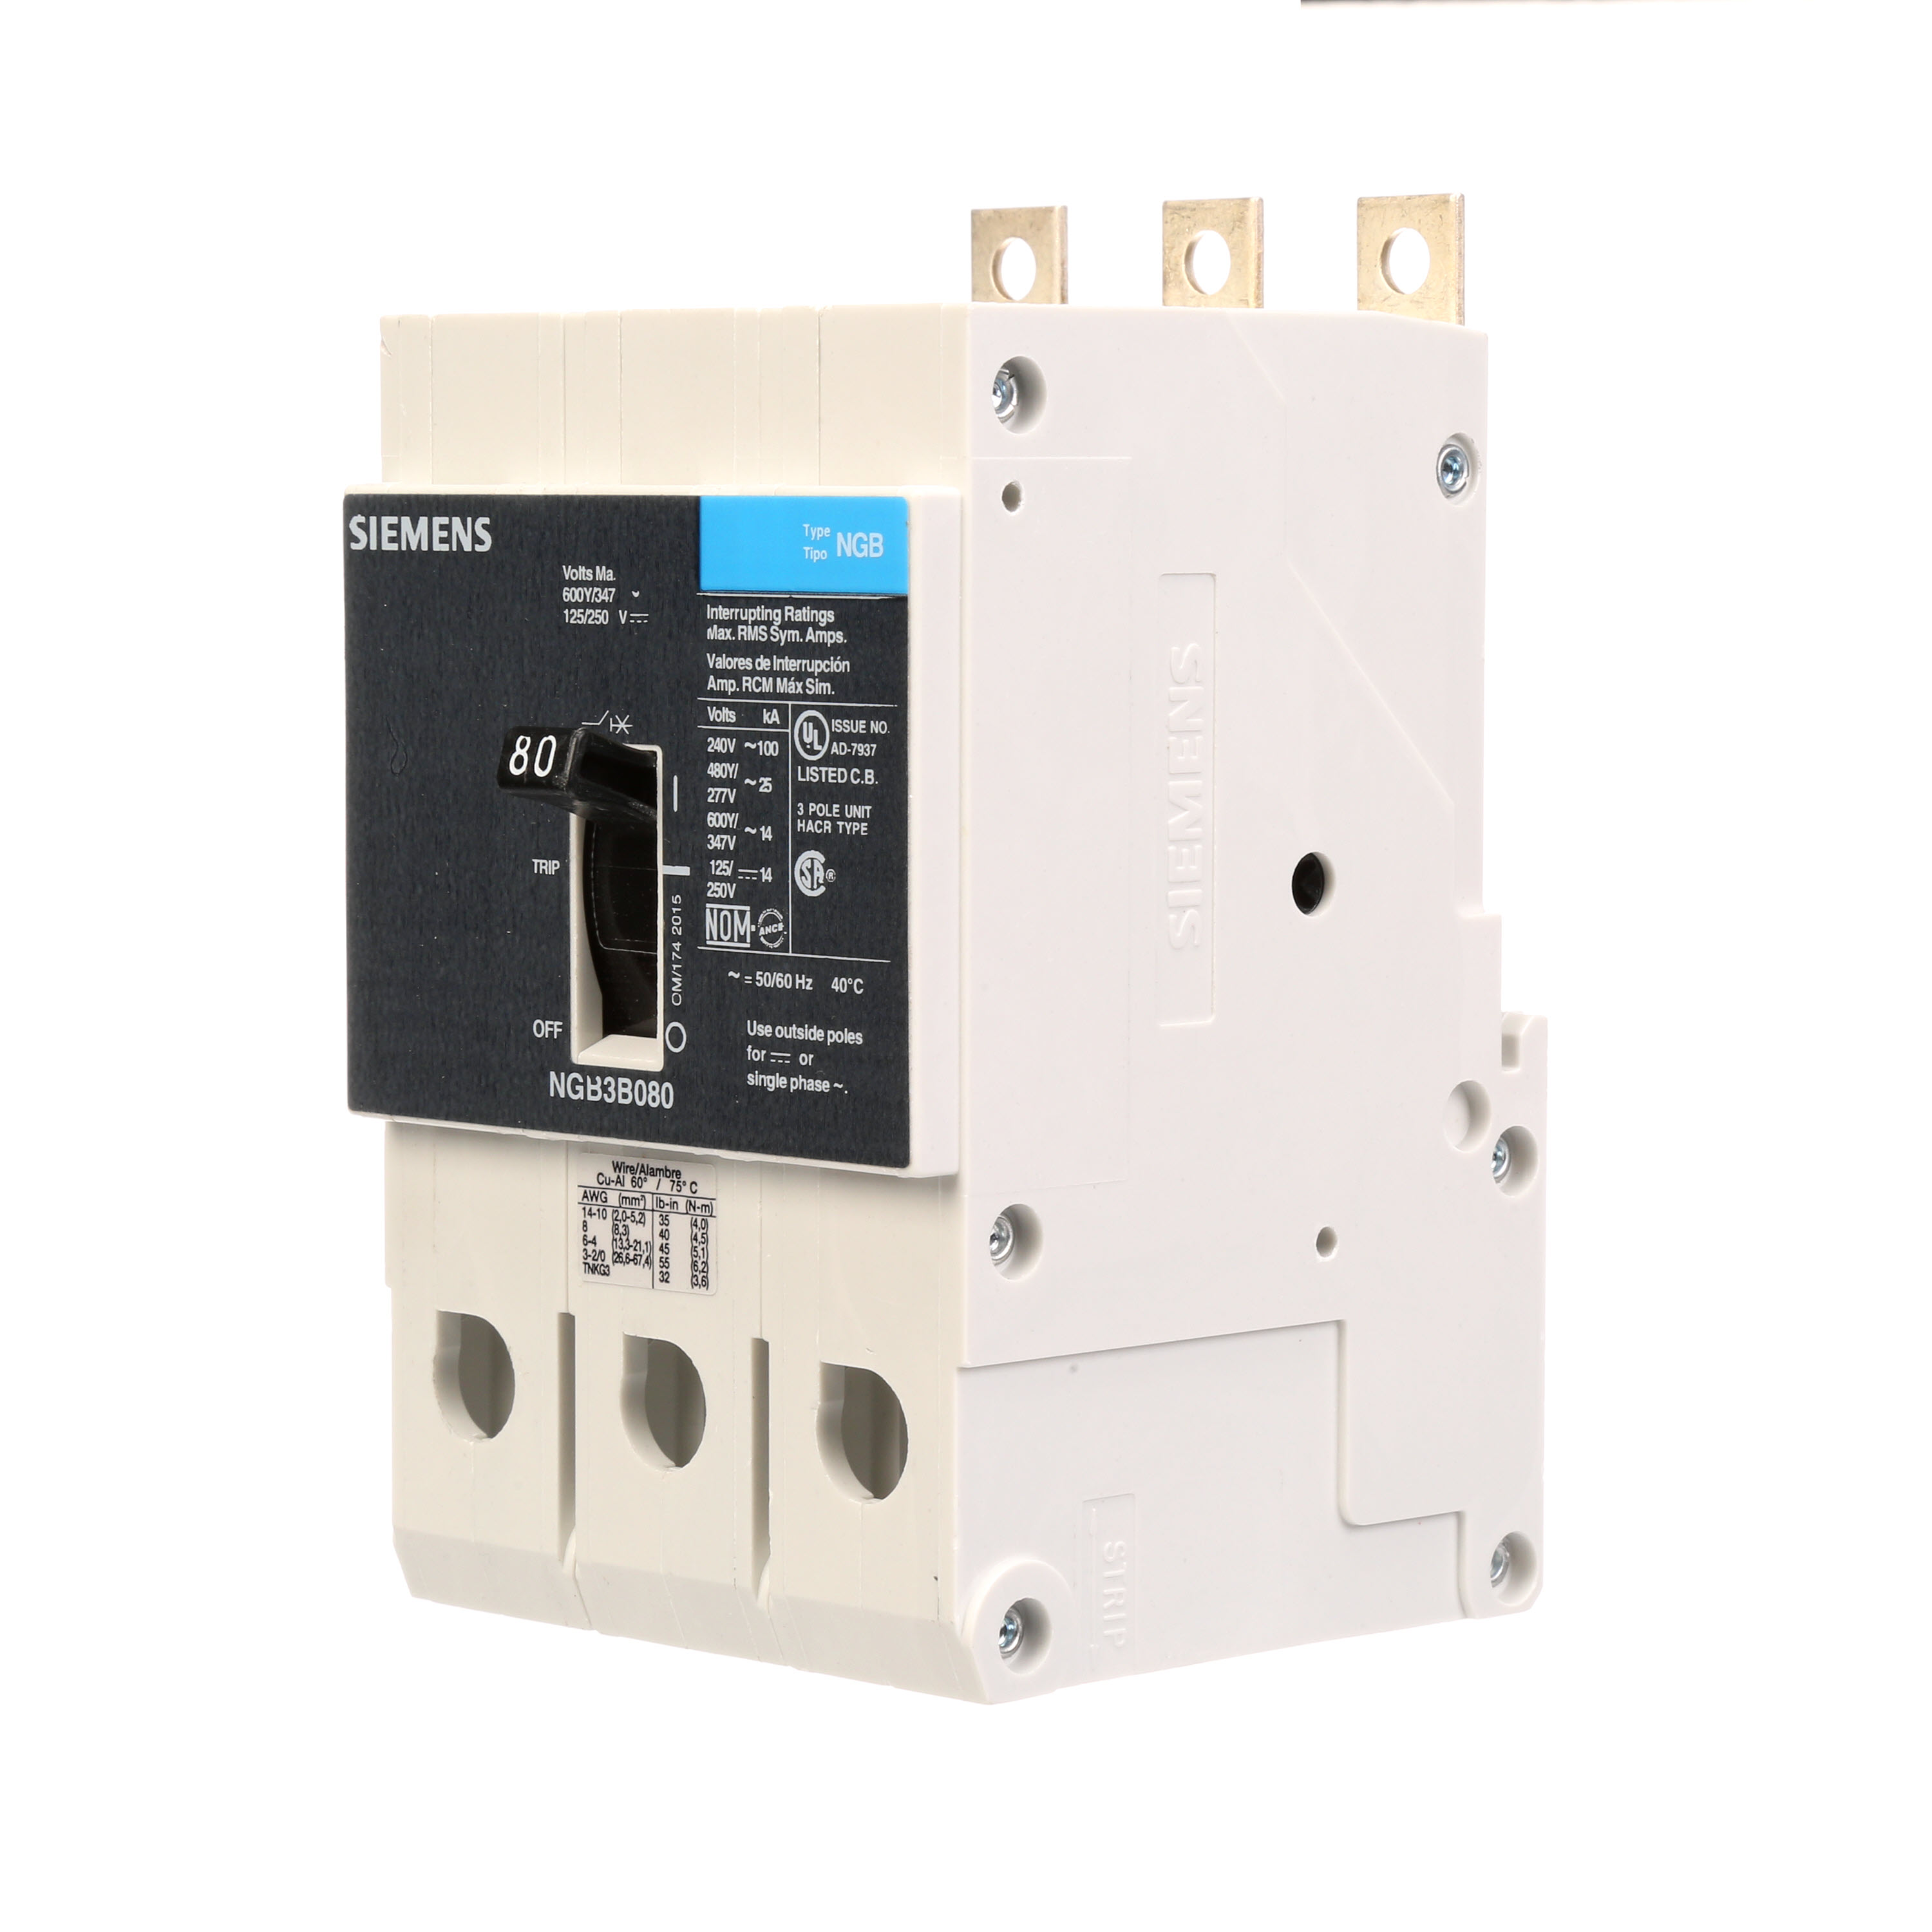 SIEMENS LOW VOLTAGE PANELBOARD MOUNT G FRAME CIRCUIT BREAKER WITH THERMAL - MAGNETIC TRIP. UL LISTED NGB FRAME WITH STANDARD BREAKING CAPACITY. 80A 3-POLE (14KAIC AT 600Y/347V) (25KAIC AT 480Y/277V). SPECIAL FEATURES MOUNTS ON PANELBOARD, NO LUGS, VALUE PACK. DIMENSIONS (W x H x D) IN 3 x 5.4 x 2.8.